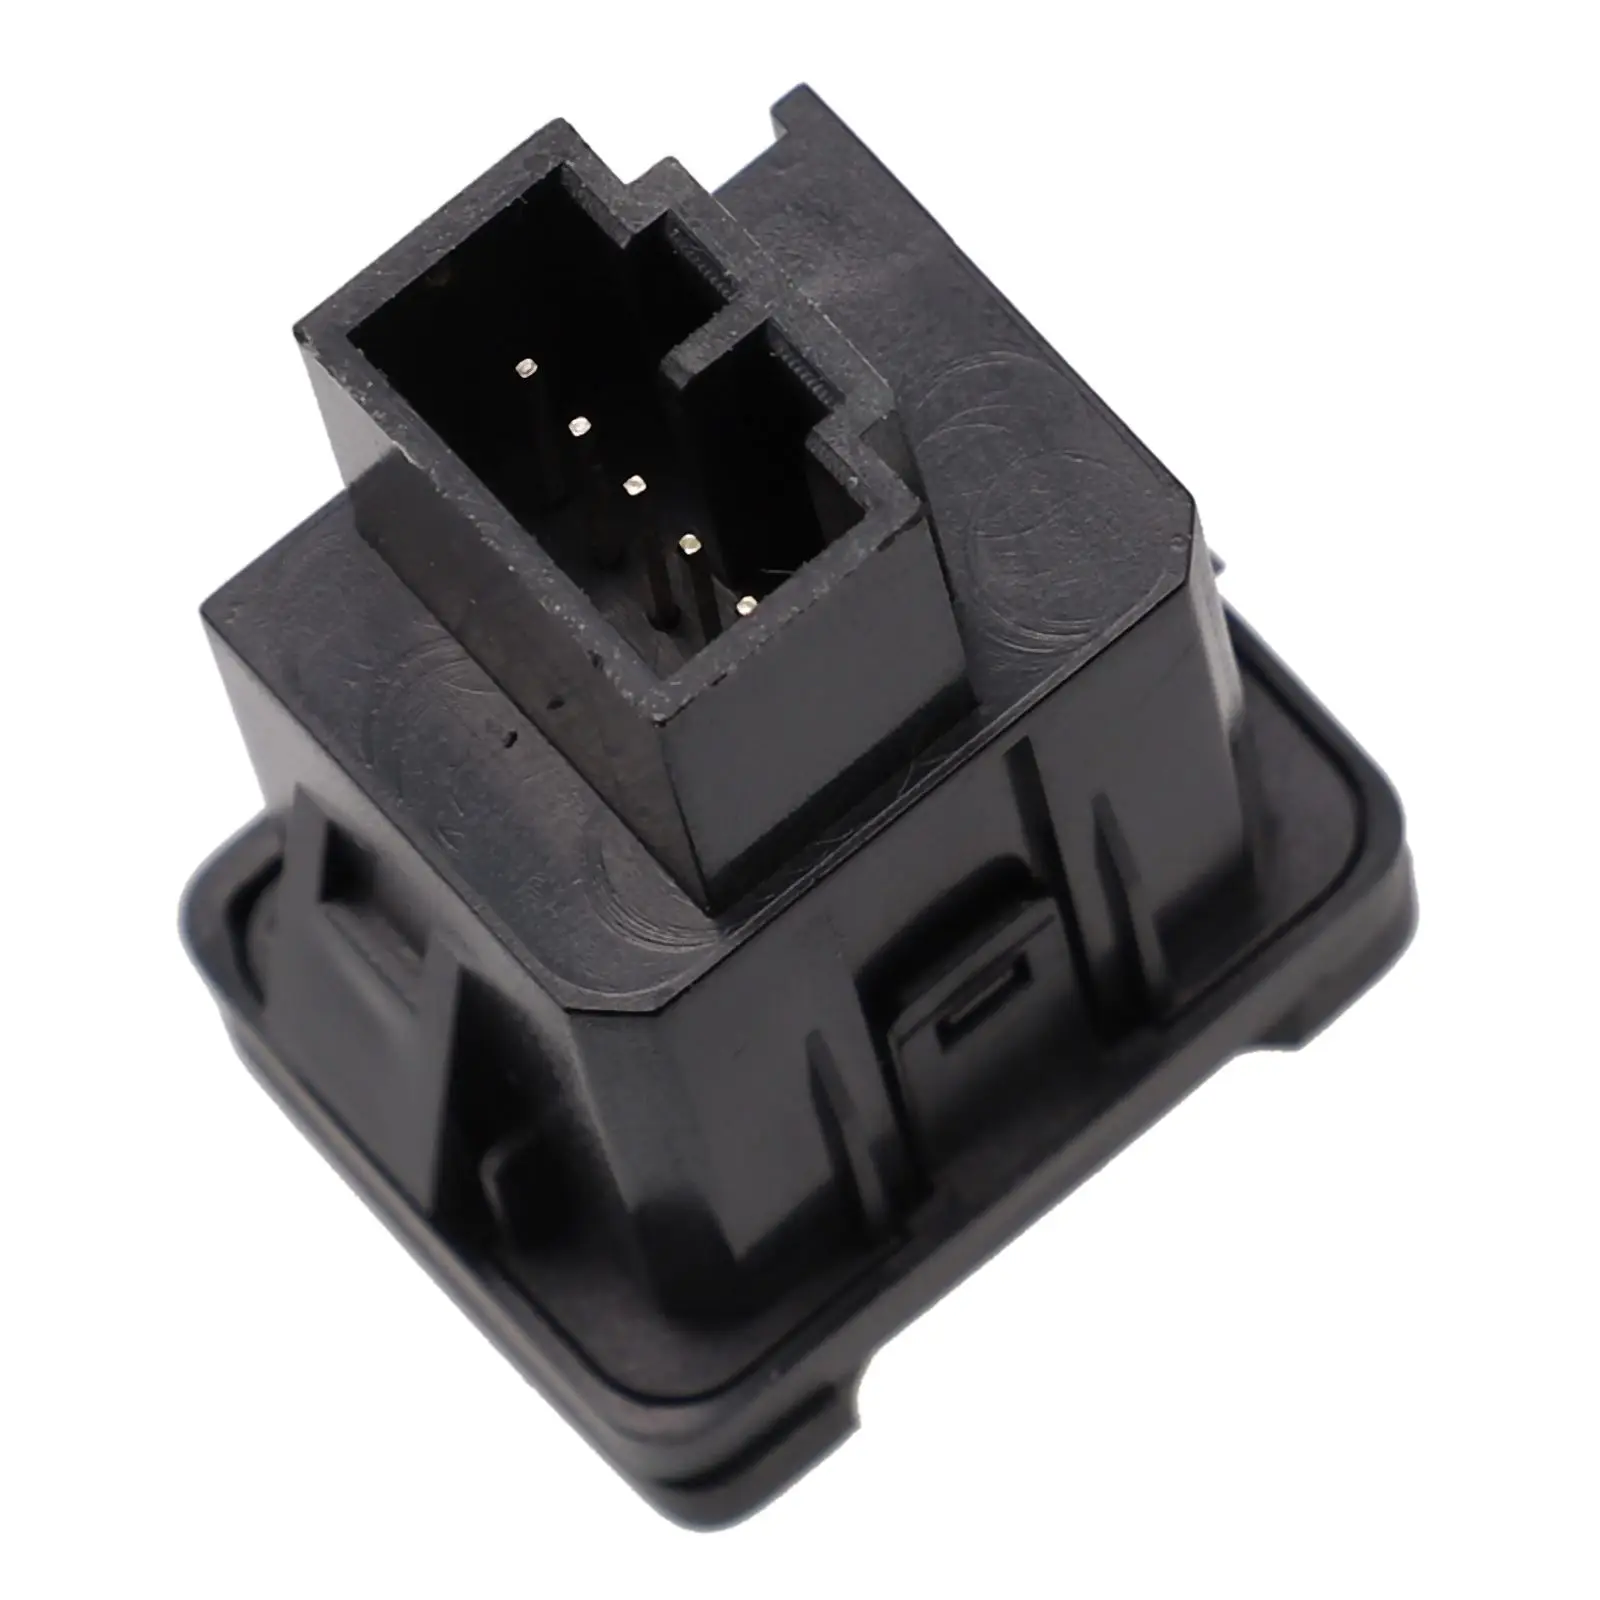 

For Honda For CRV 2009-2011 Auxiliary Input Plug Adapter Black Plastic Replacement Vehicle 39112-SNA-A01 39112SNAA01 Accessories